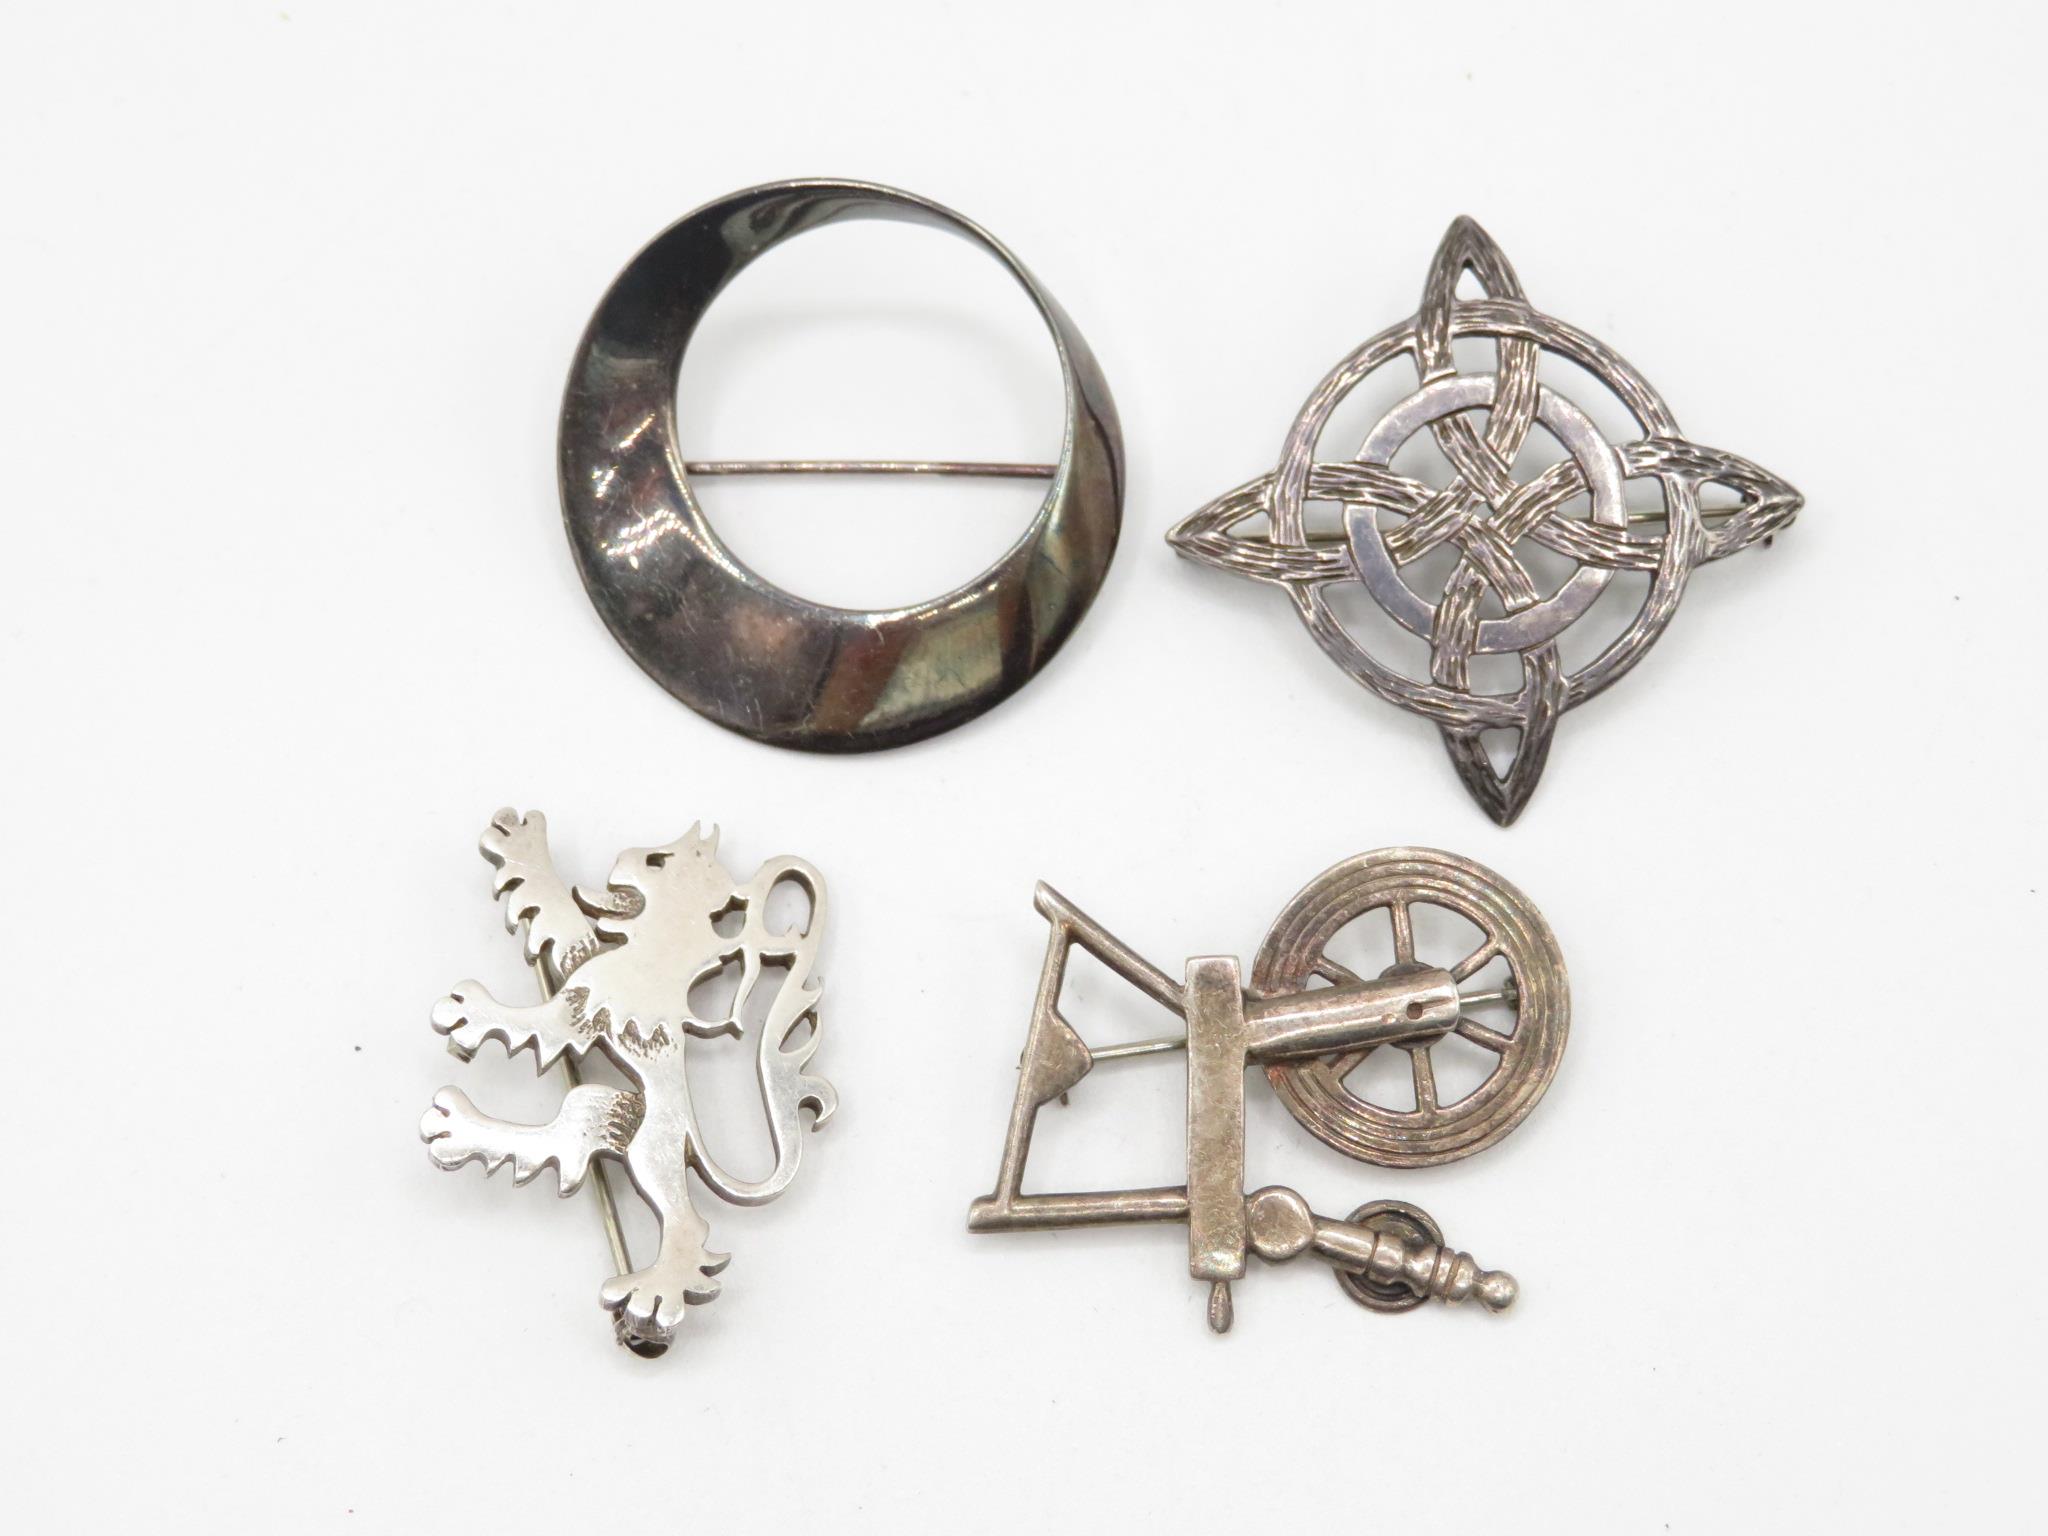 Four Silver Brooches By Ola Gorie And Malcom Gray (28g) - Image 2 of 3